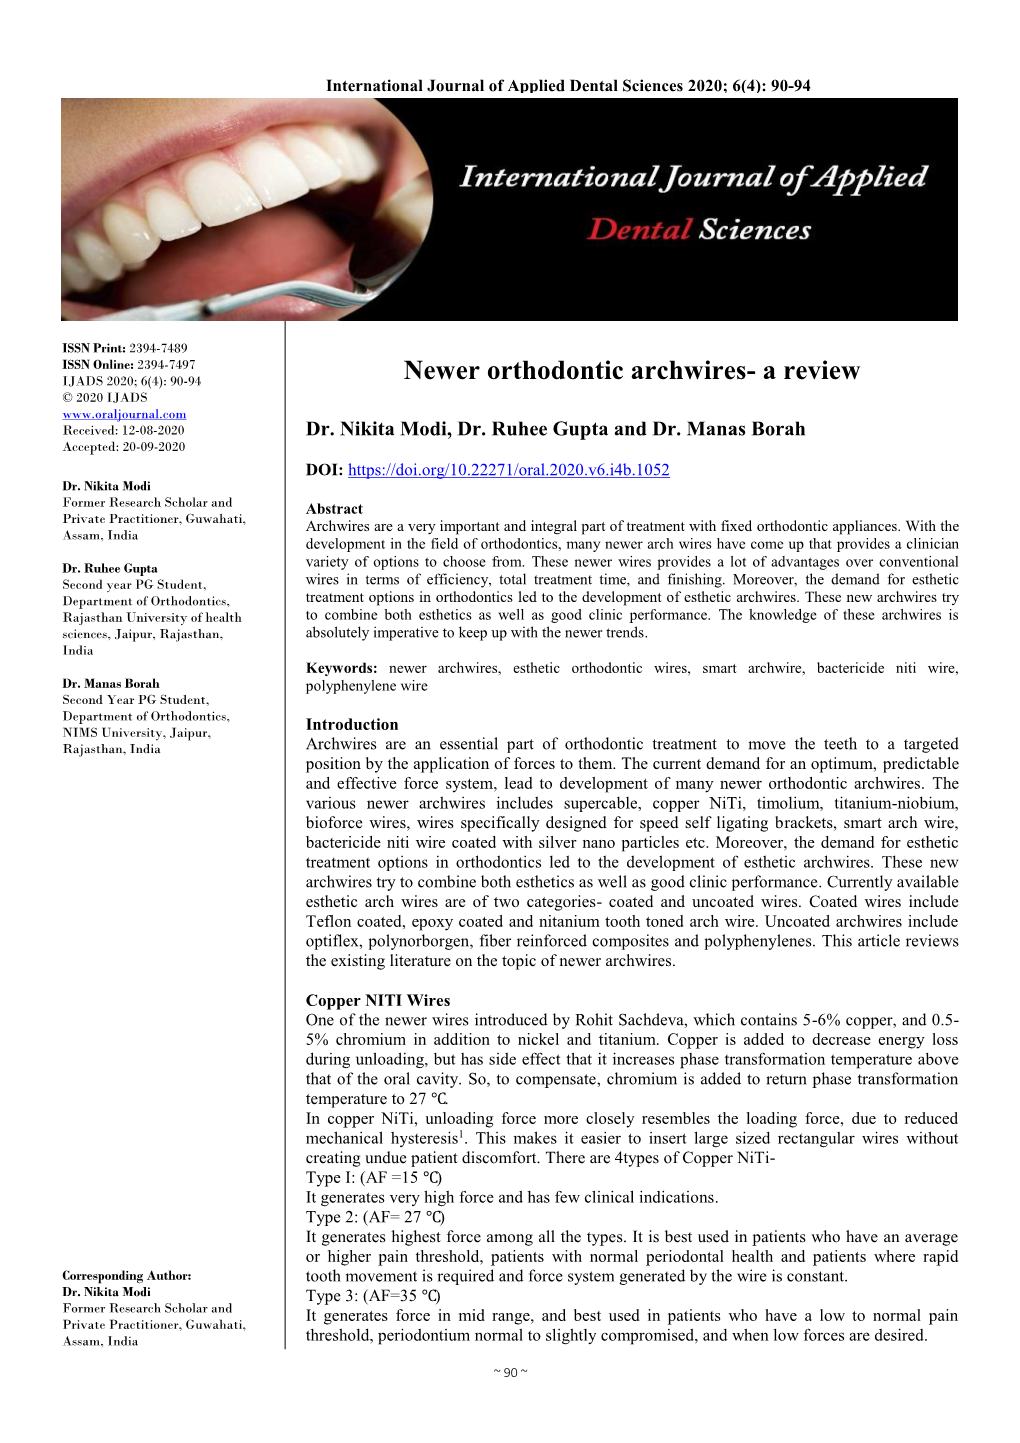 Newer Orthodontic Archwires- a Review © 2020 IJADS Received: 12-08-2020 Dr